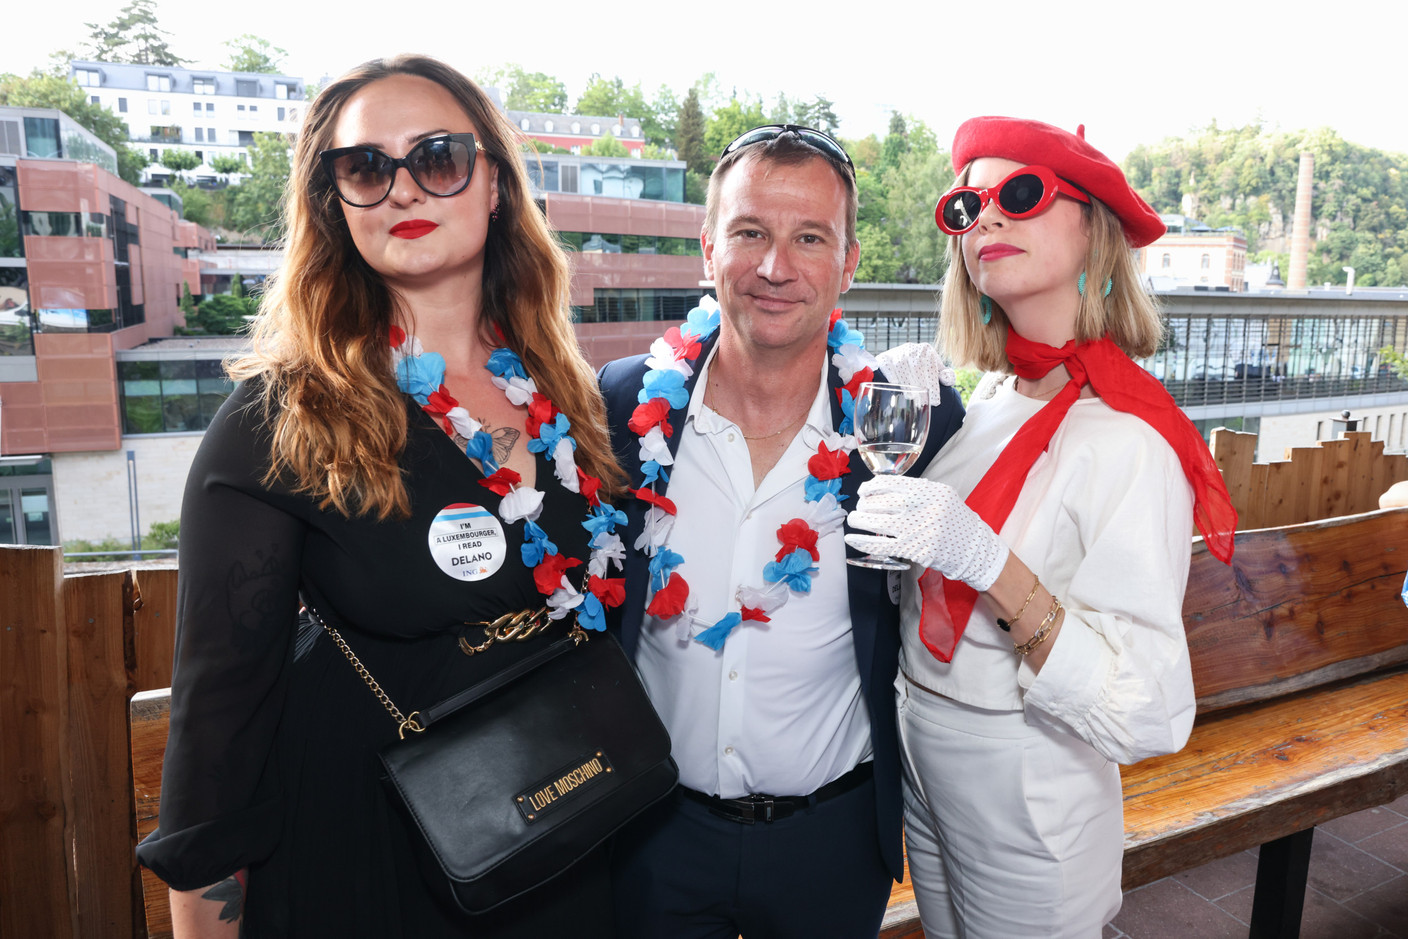 Attendees are seen during the Delano summer party, 13 July 2023. Photo: Marie Russillo/Maison Moderne